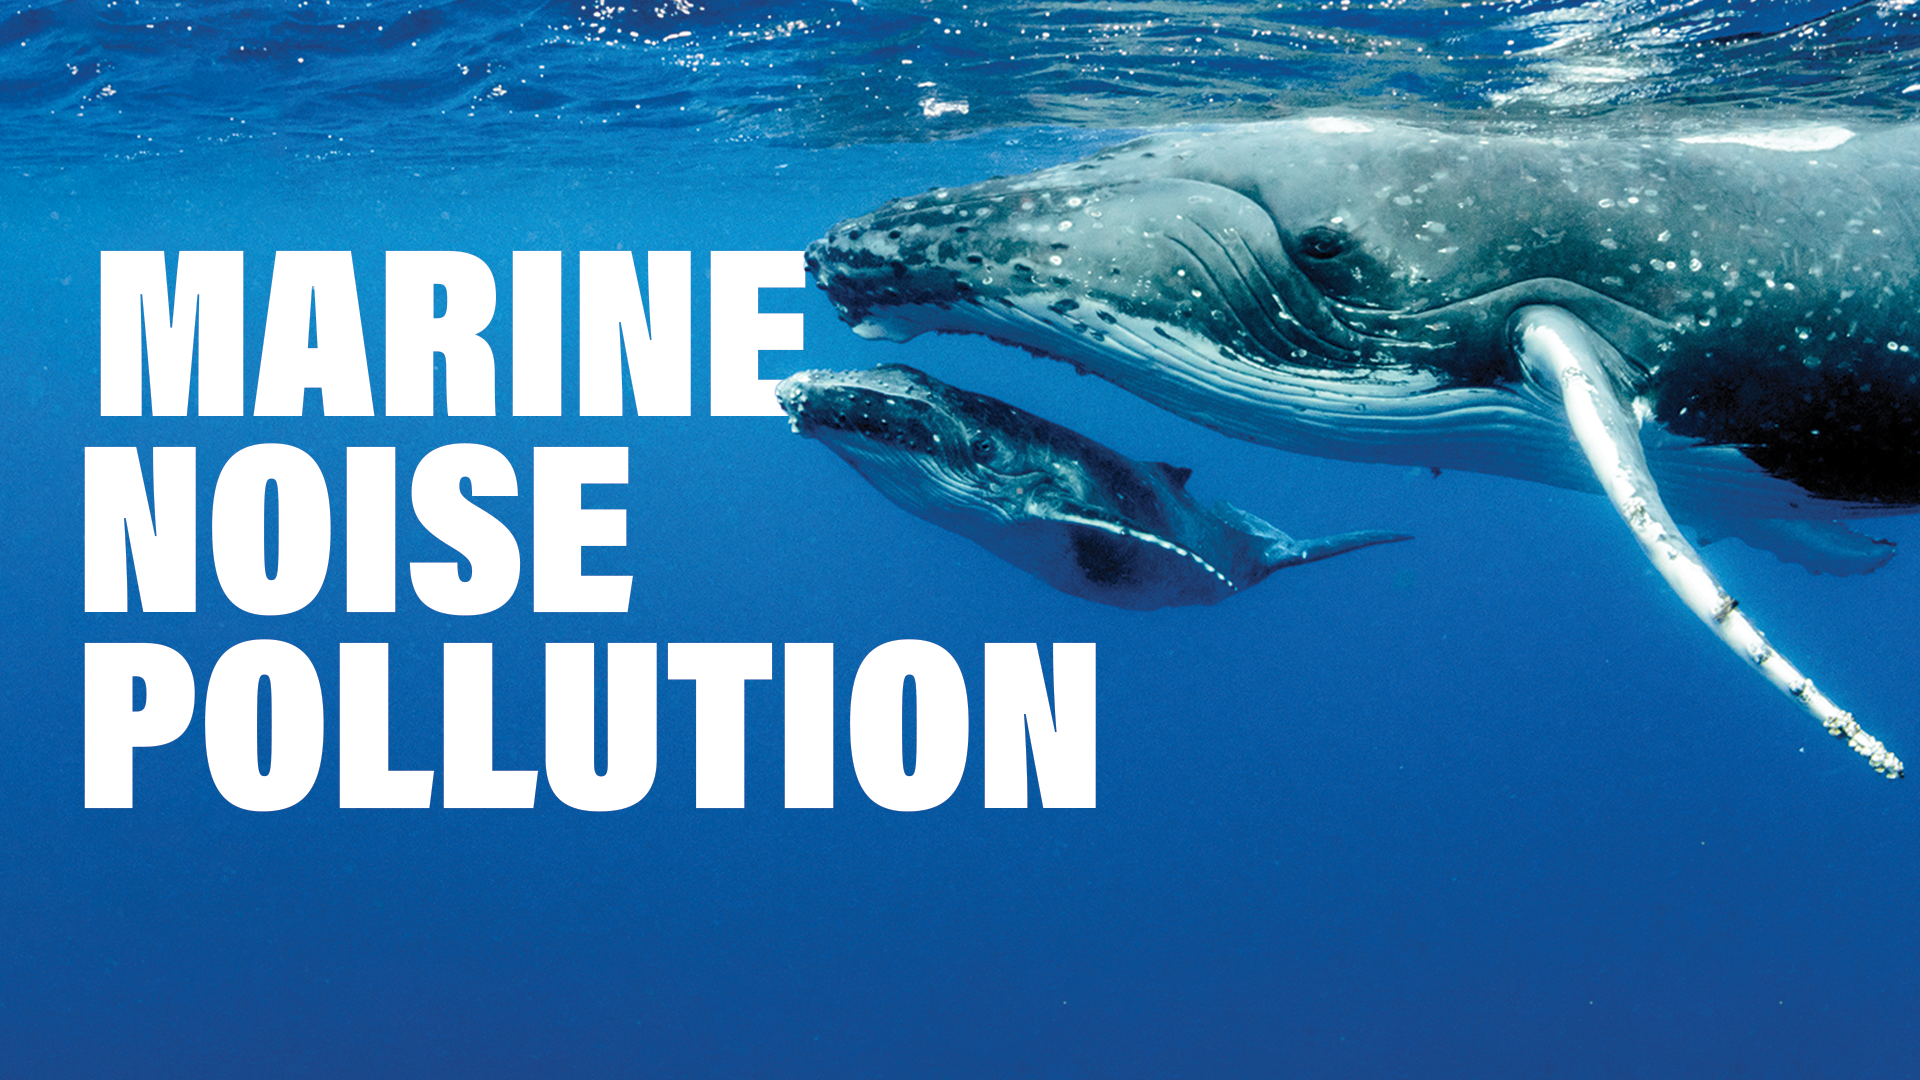 Marine Noise Pollution and the Impacts on Marine Life